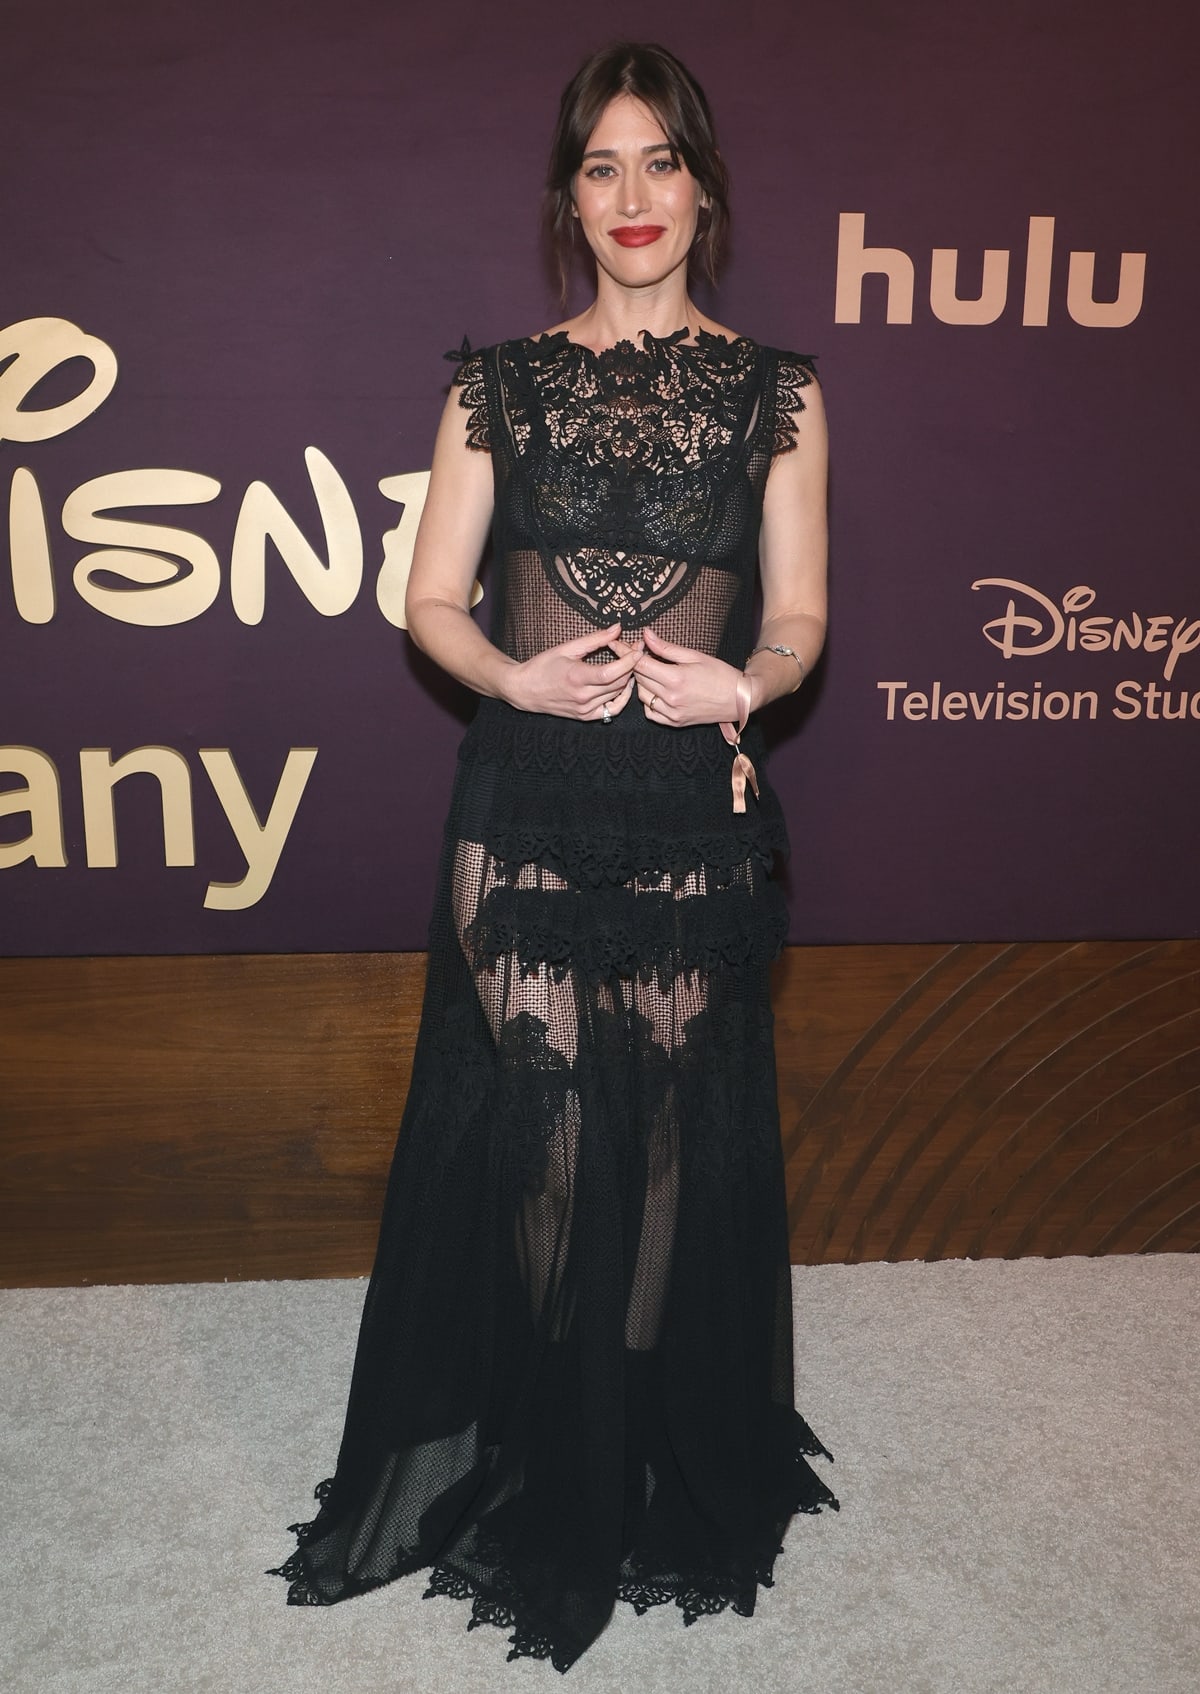 At the Walt Disney Emmy Awards Party in Los Angeles on January 15, 2024, Lizzy Caplan elegantly showcased her support for women's empowerment by wearing a long black lace dress from Maria Grazia Chiuri's Dior Spring-Summer 2024 collection, highlighting Chiuri's renowned feminist-influenced fashion